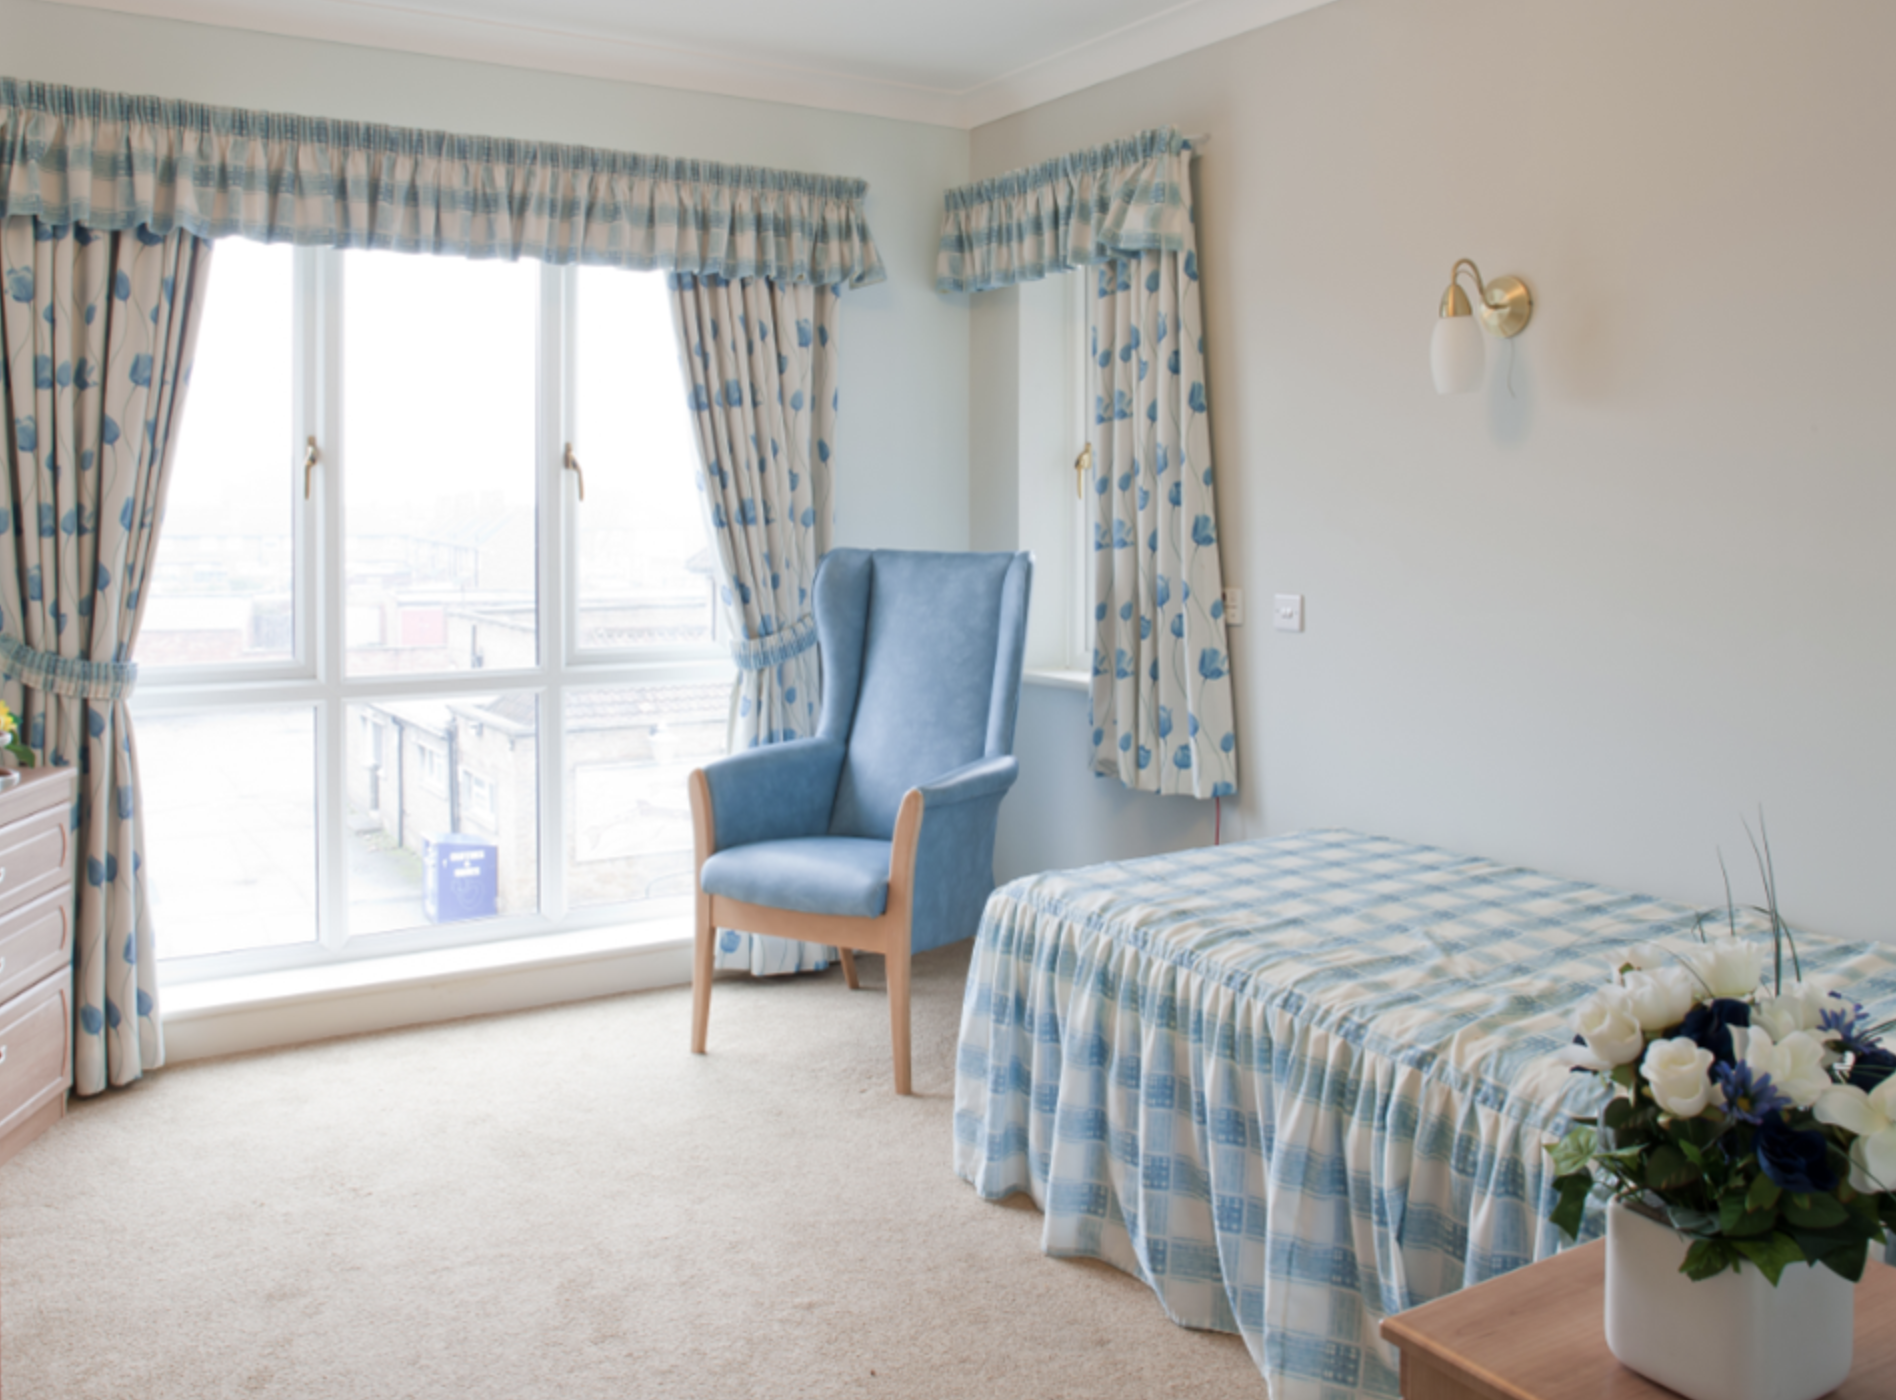 Bedroom of Berkeley House care home in Hull, East Yorkshire